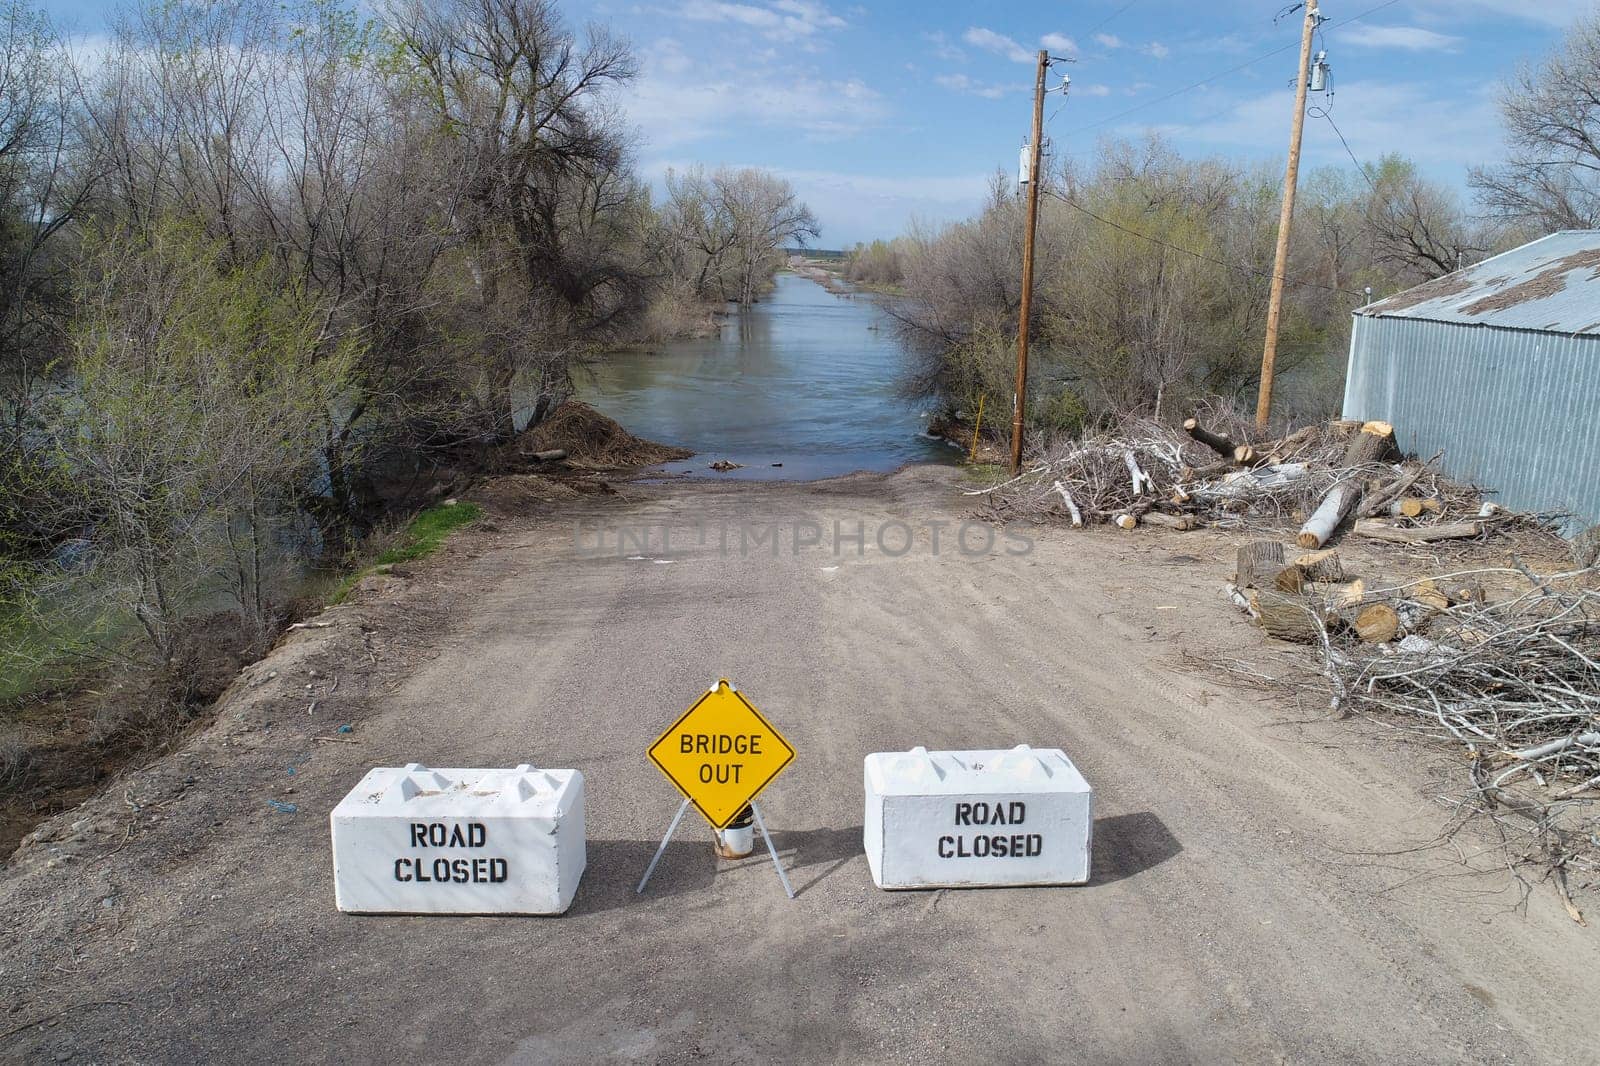 road is closed as the bridge is out due to being submerged under the river with high flood levels